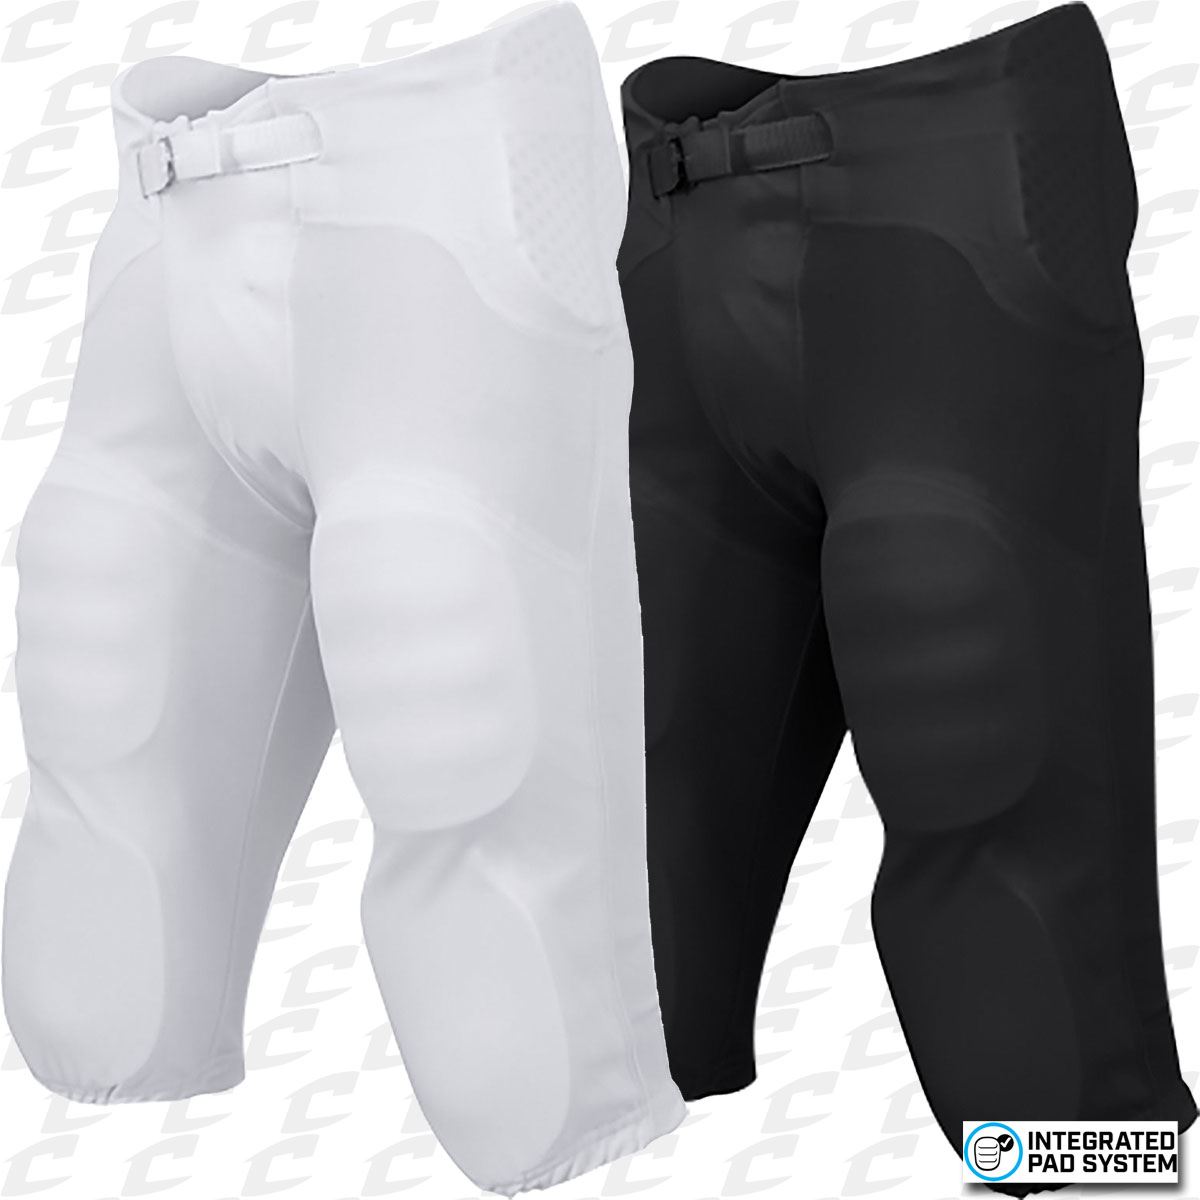 NEW Navy Champro Integrated Youth Football Game Pants With Pads Lists @ $25 